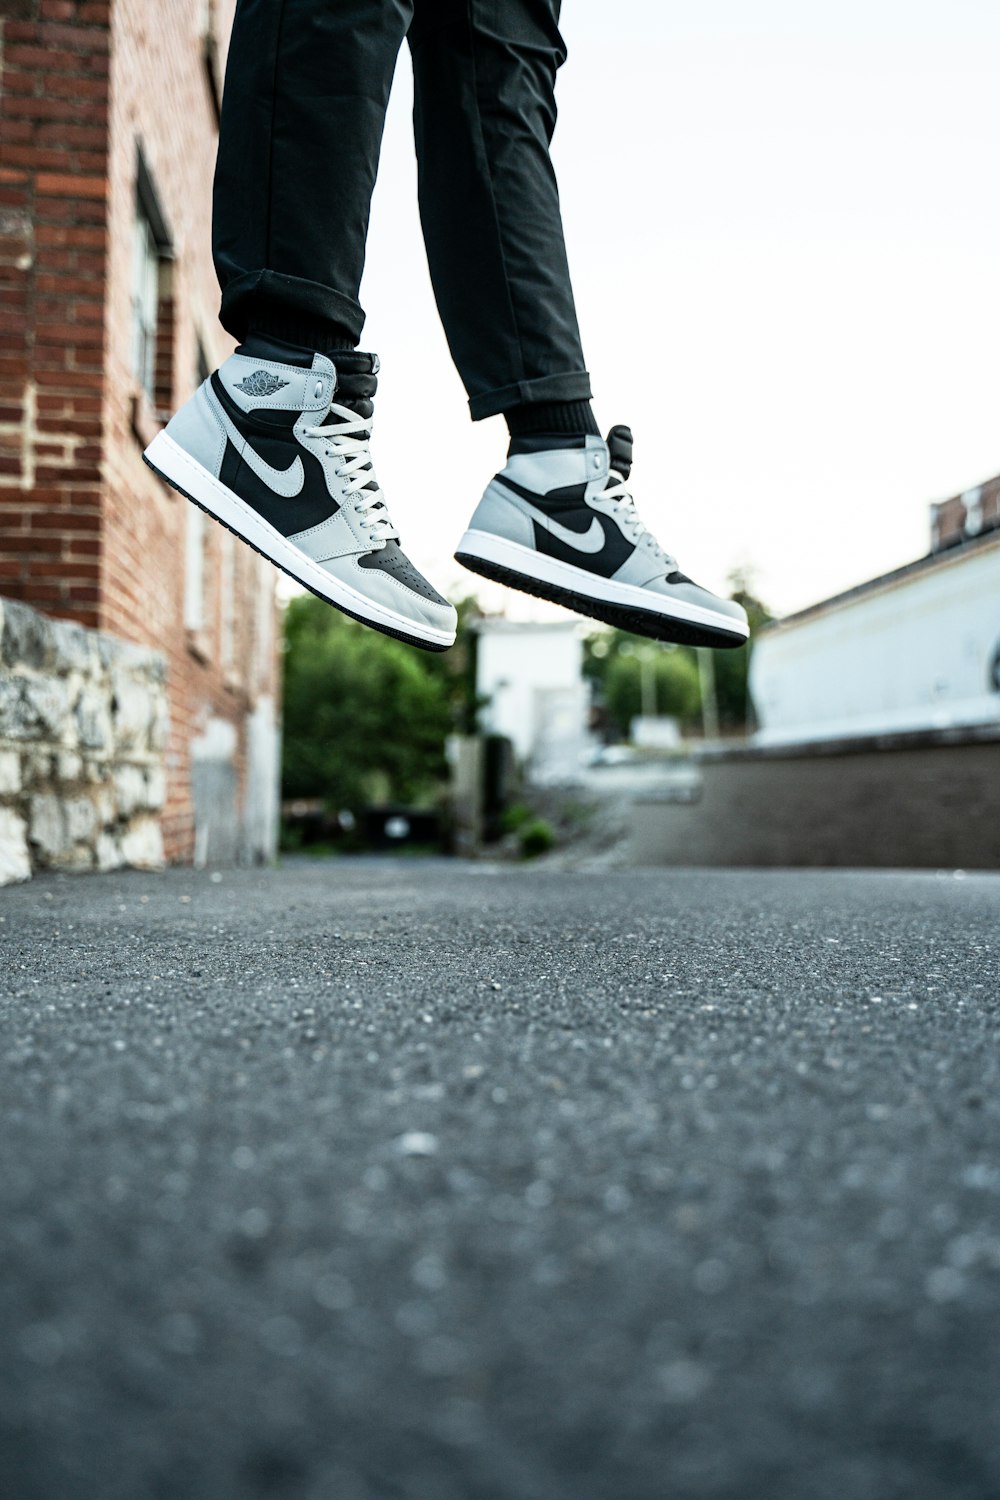 person in black and white nike sneakers